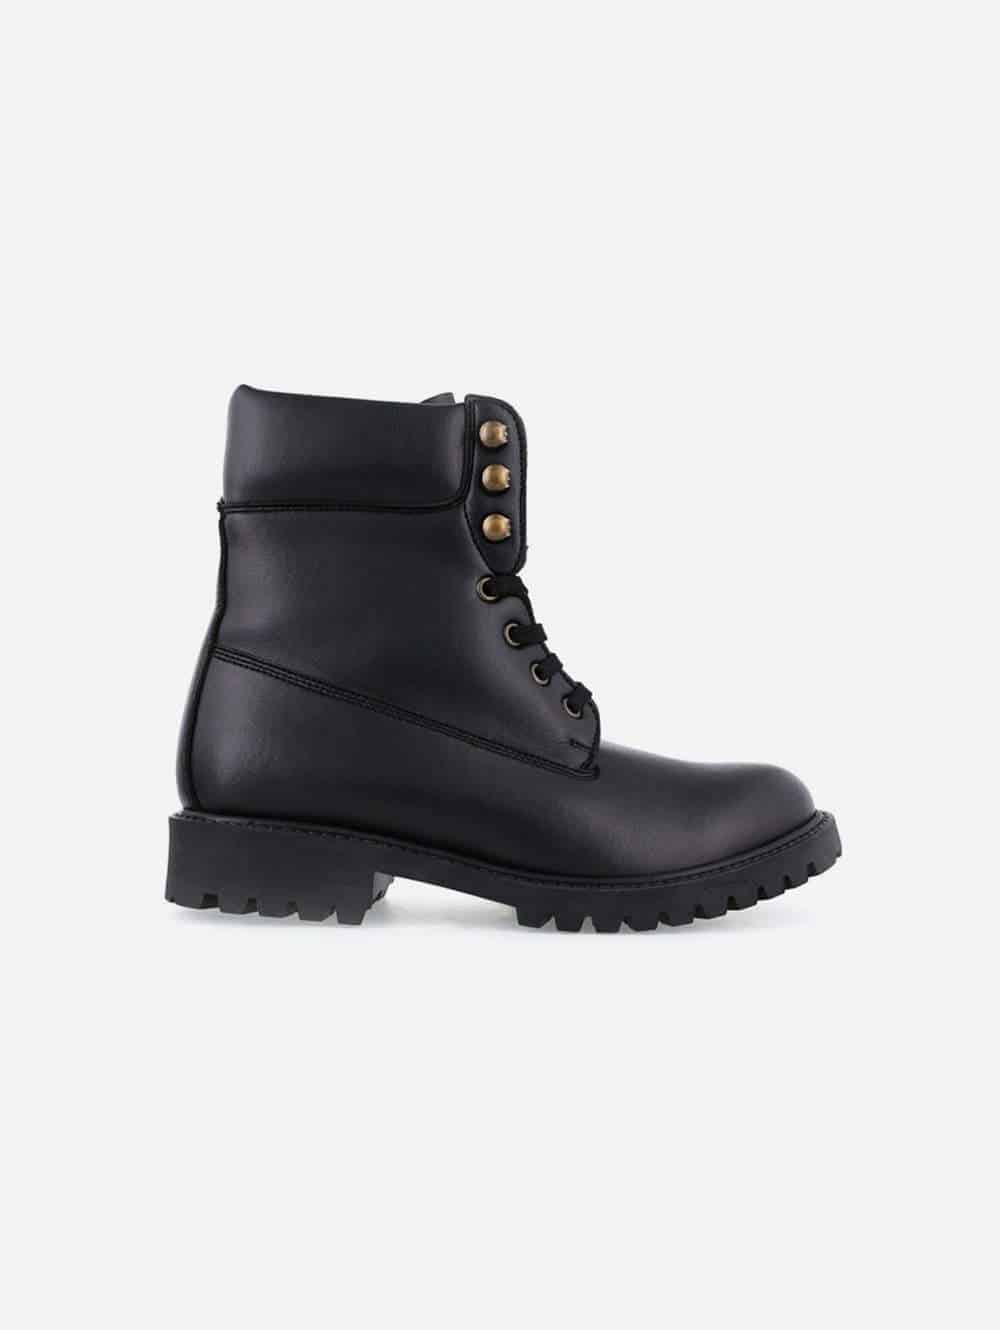 Details about   Vegan Ankle Boots Zip Elastic Water Resistant Breathable Lined Non-Slip Comfort